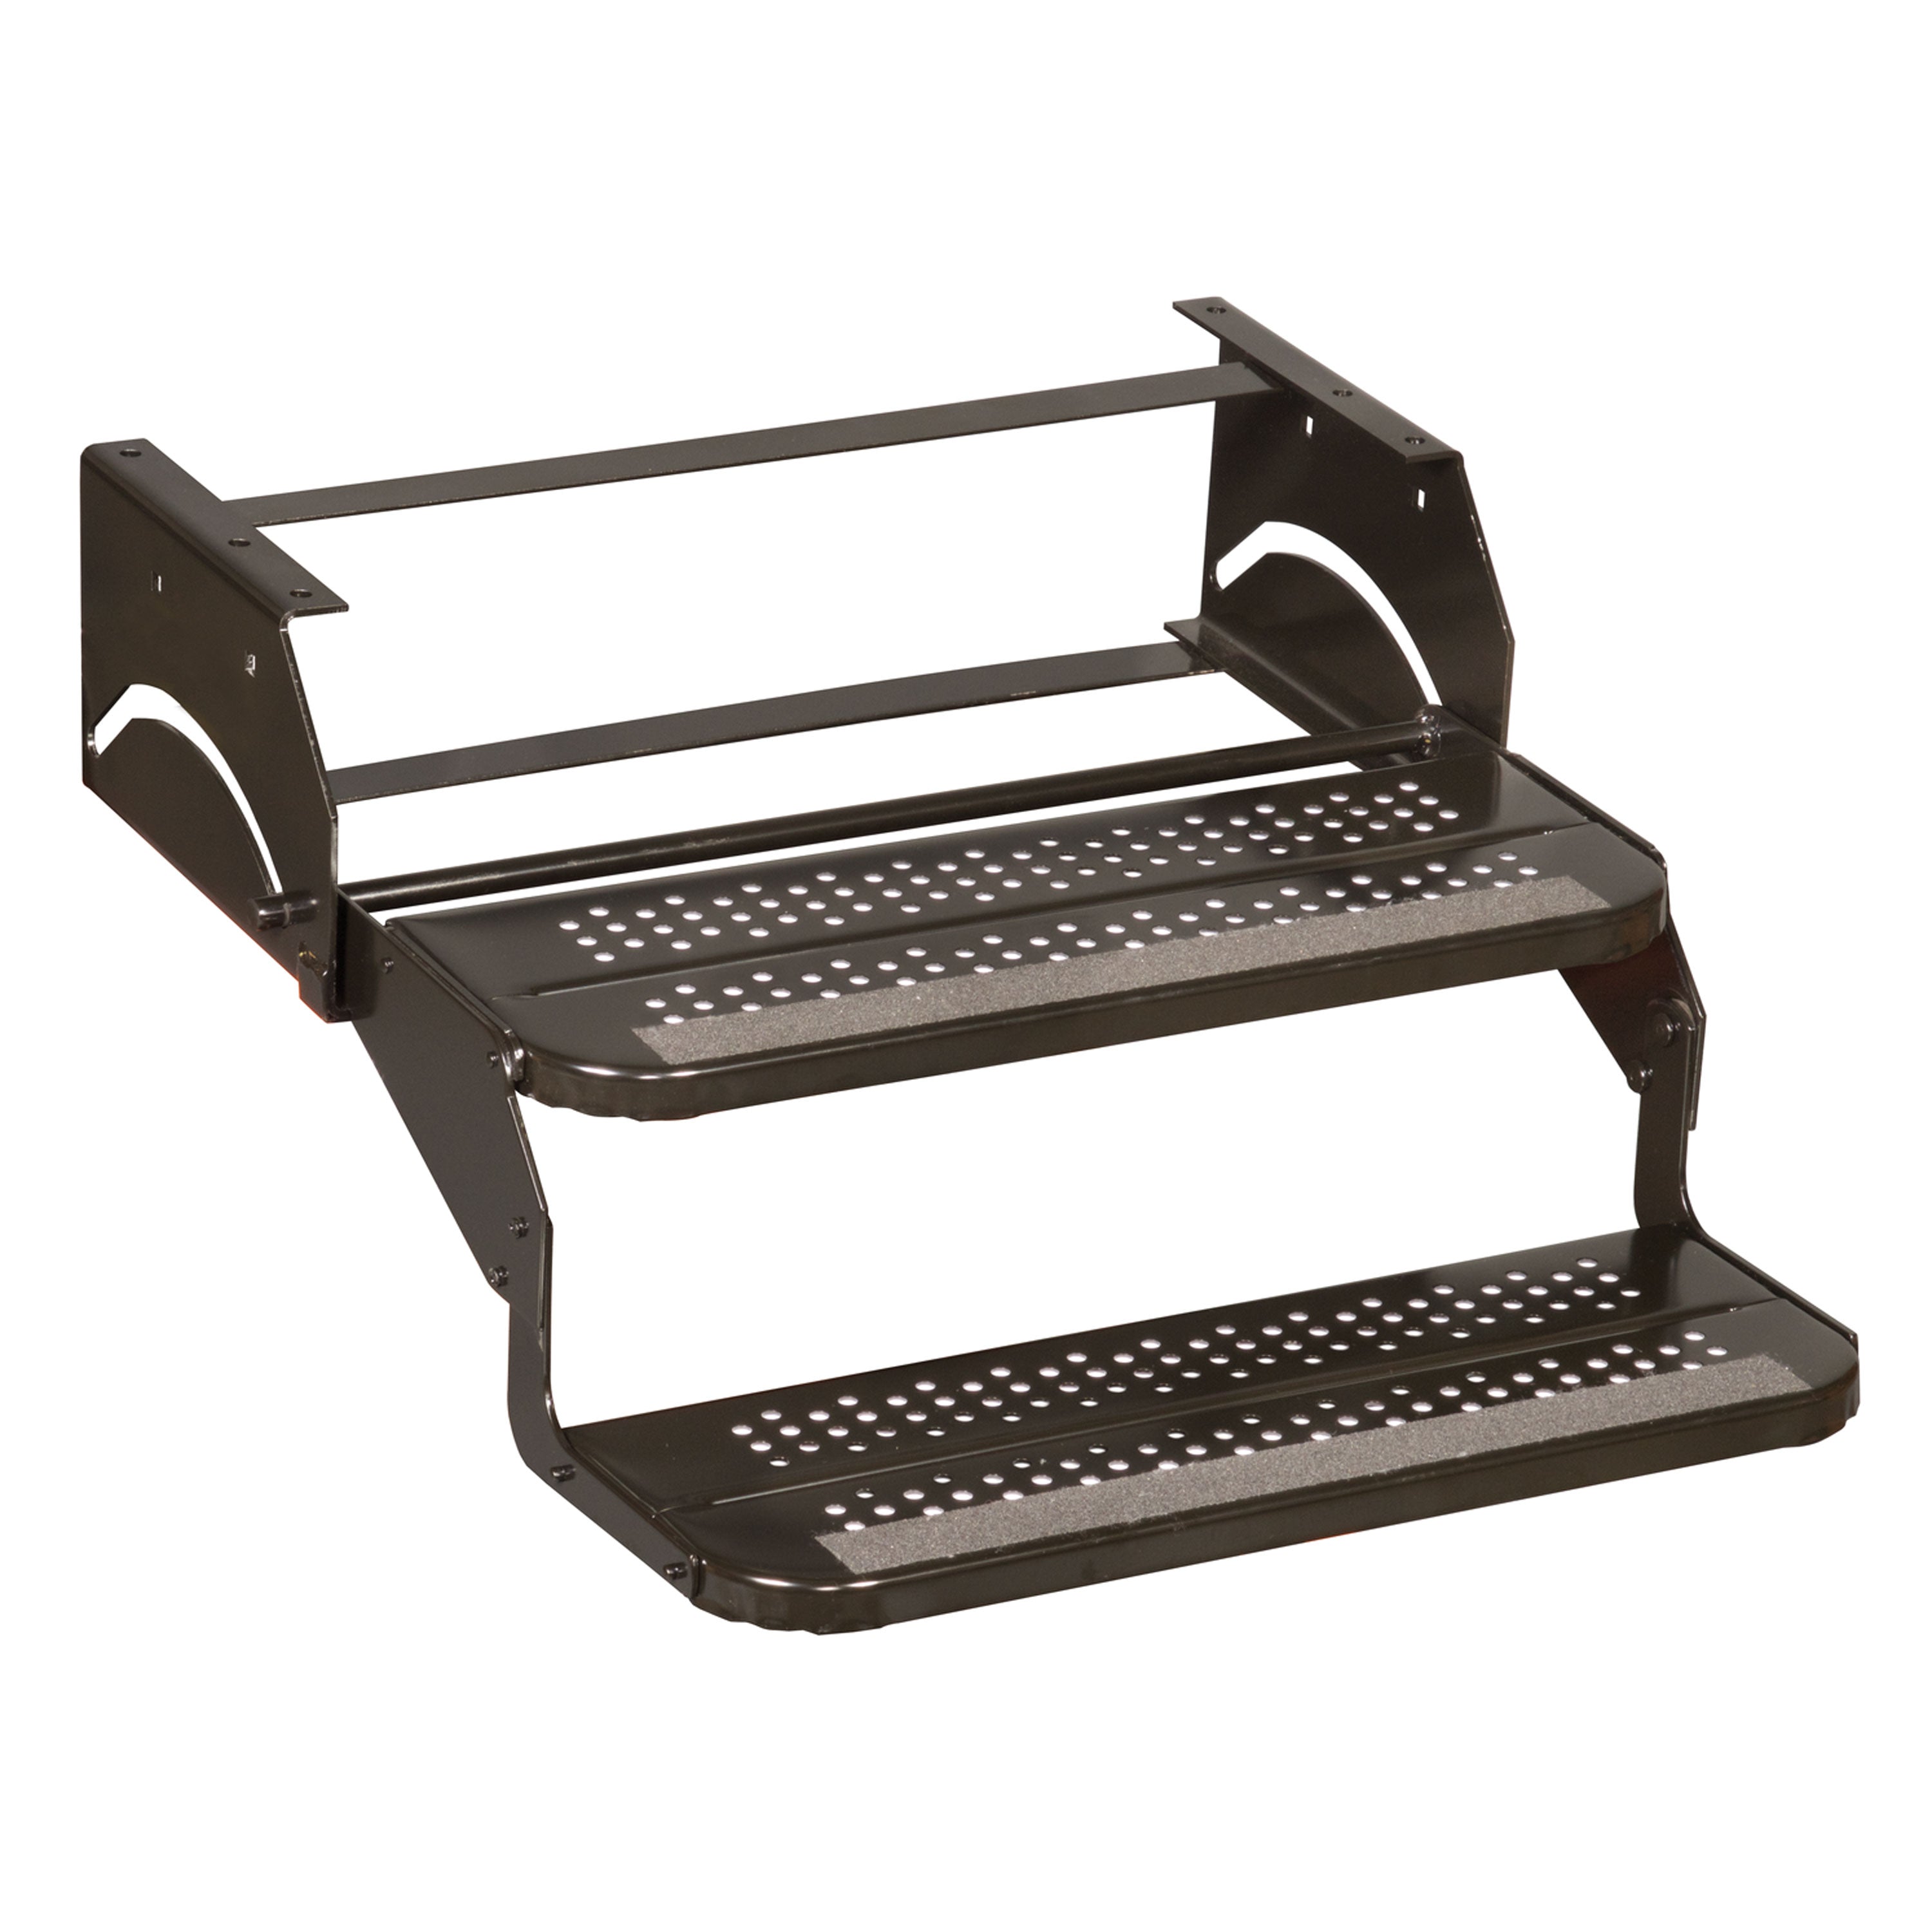 Elkhart Tool & Die 920-9 Standard Double Camper Step with 20" Wide Tread - 15.75" Drop and 9" Risers